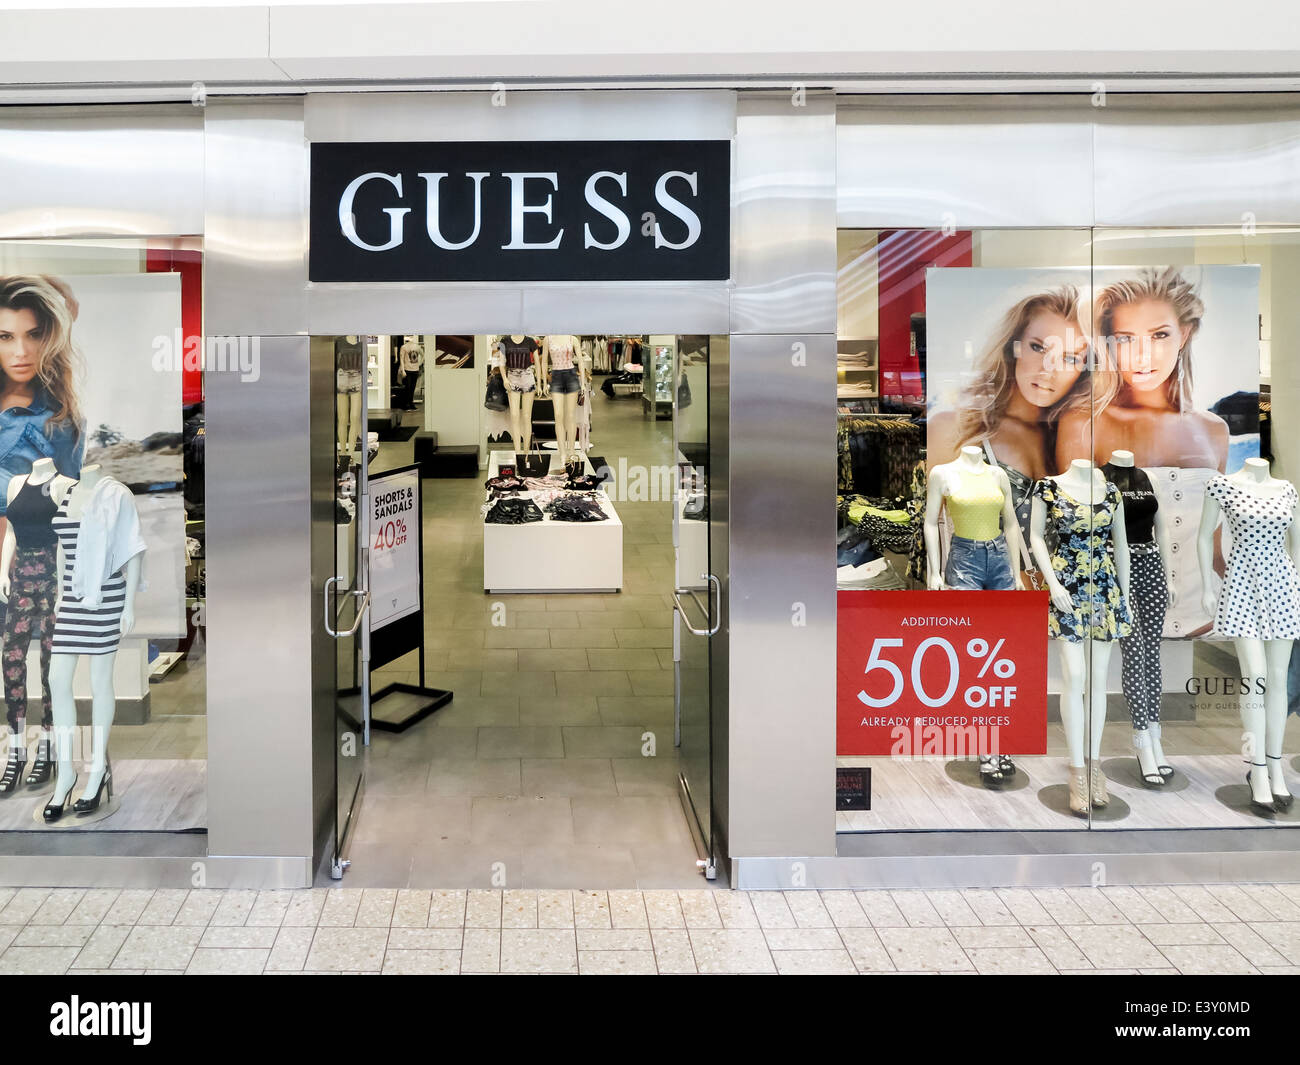 Guess Sign High Resolution Stock Photography and Images - Alamy